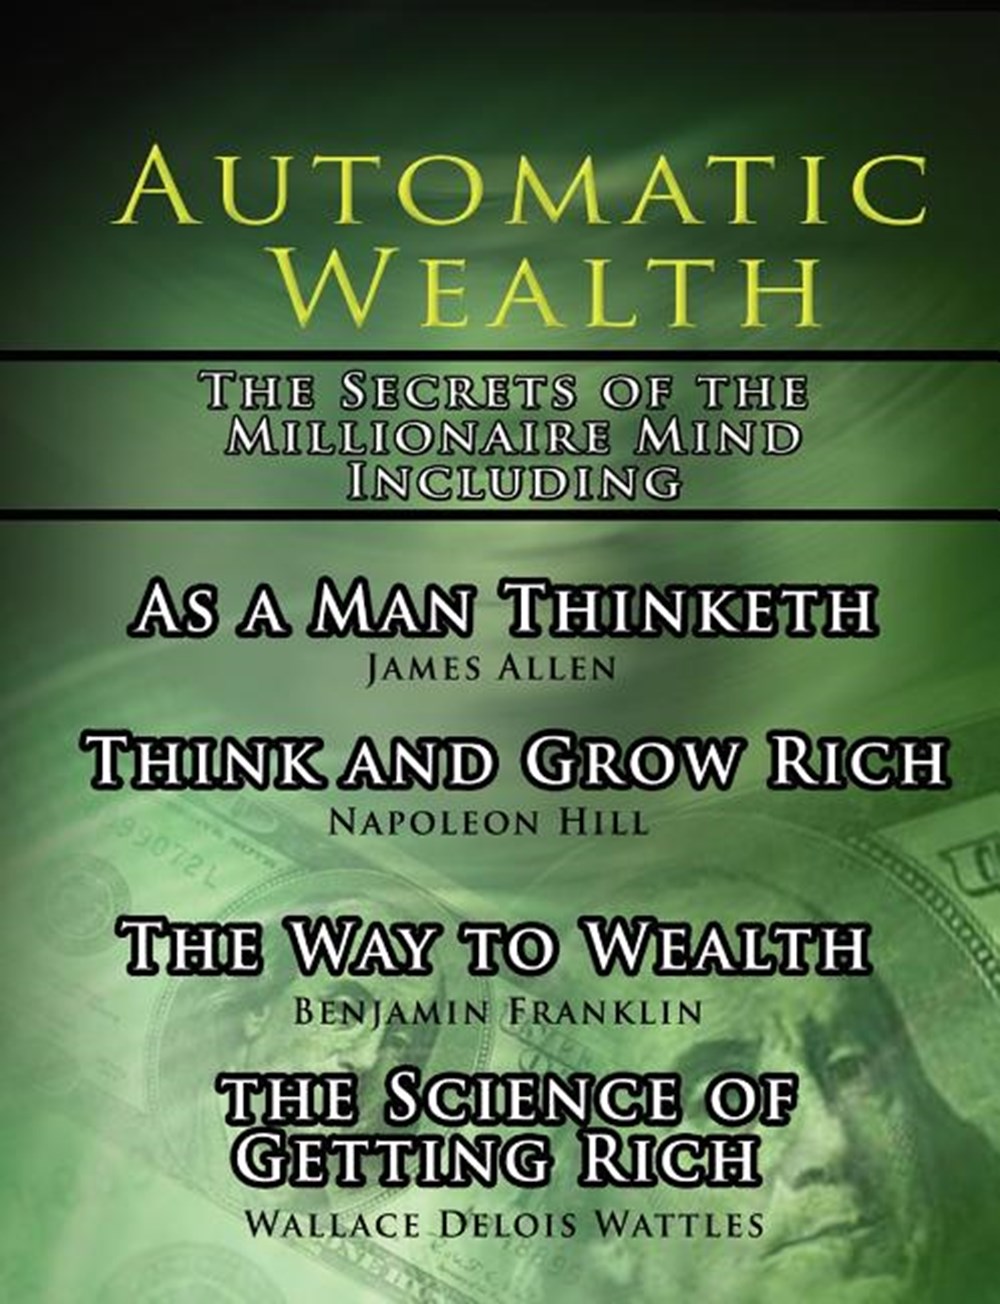 Automatic Wealth, The Secrets of the Millionaire Mind-Including: As a Man Thinketh, The Science of G